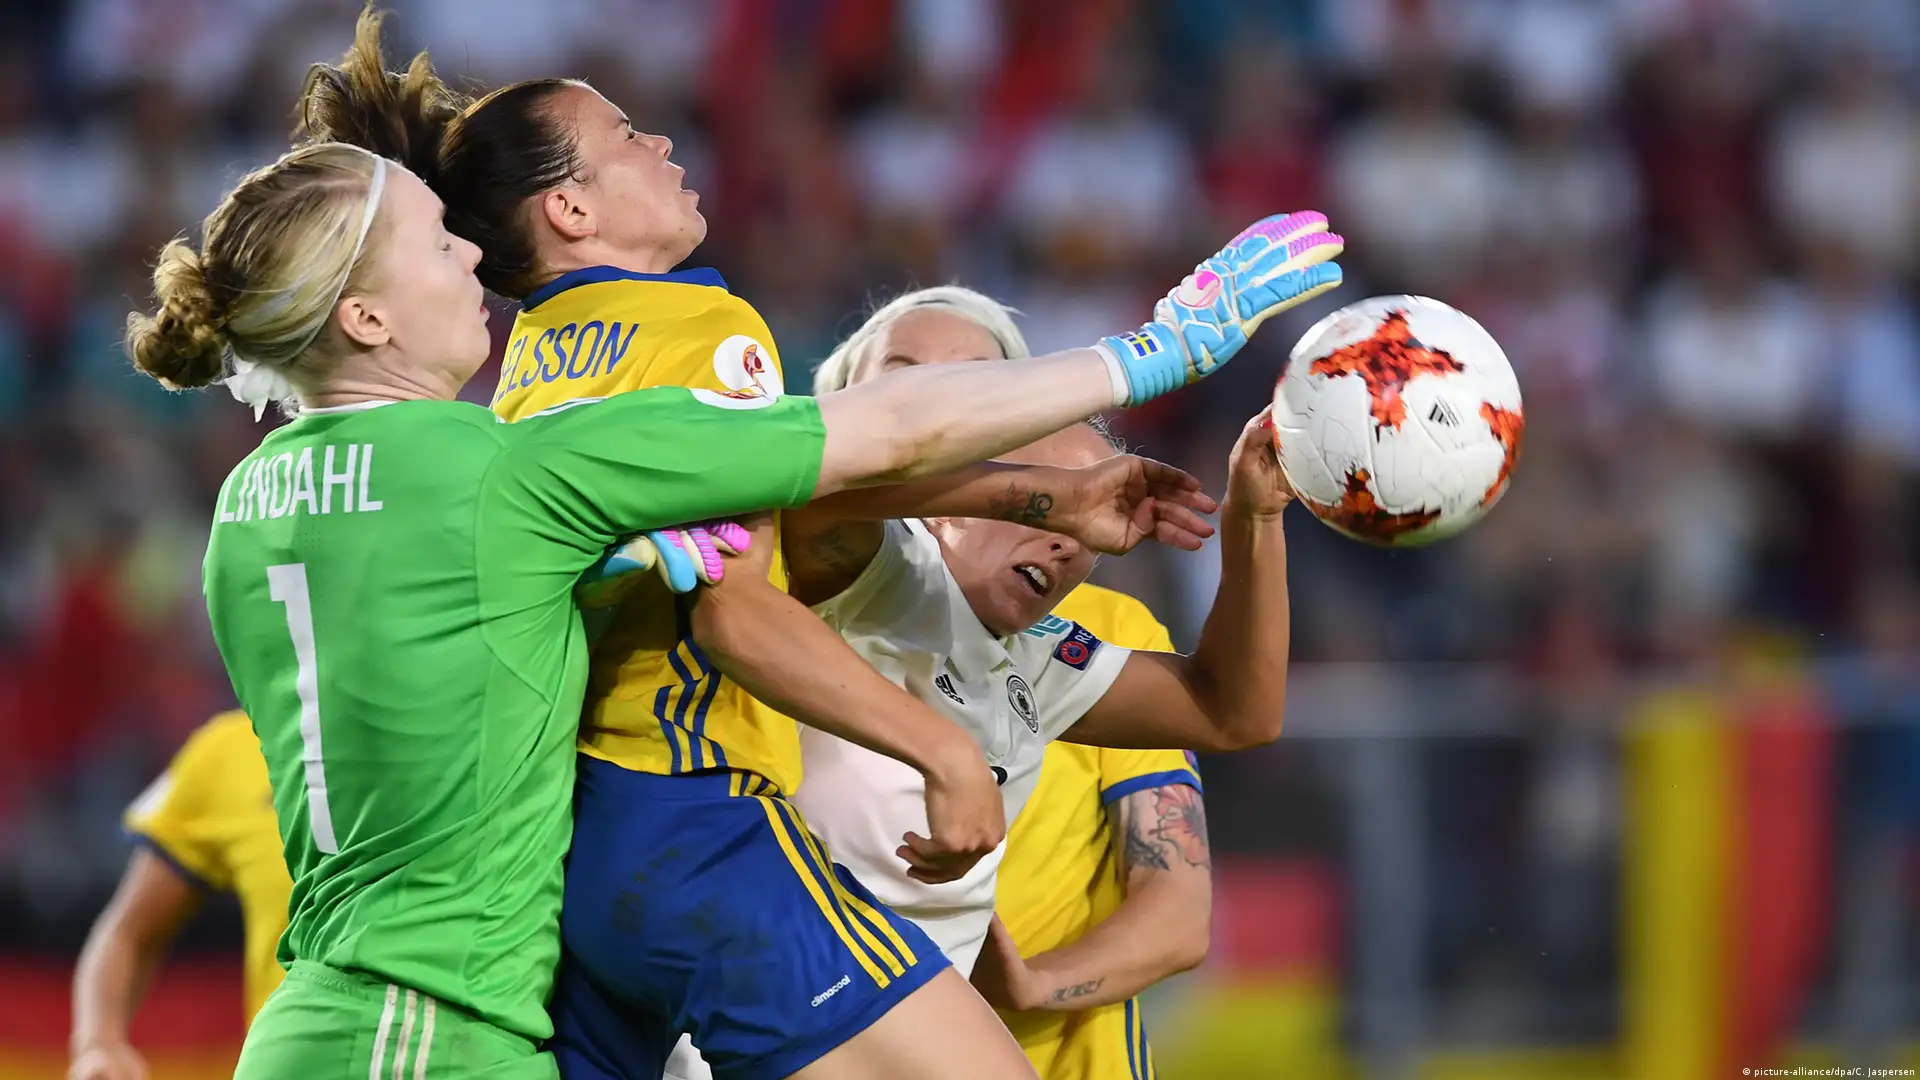 Closing the gap: Brazil announces equal pay for men, women footballers